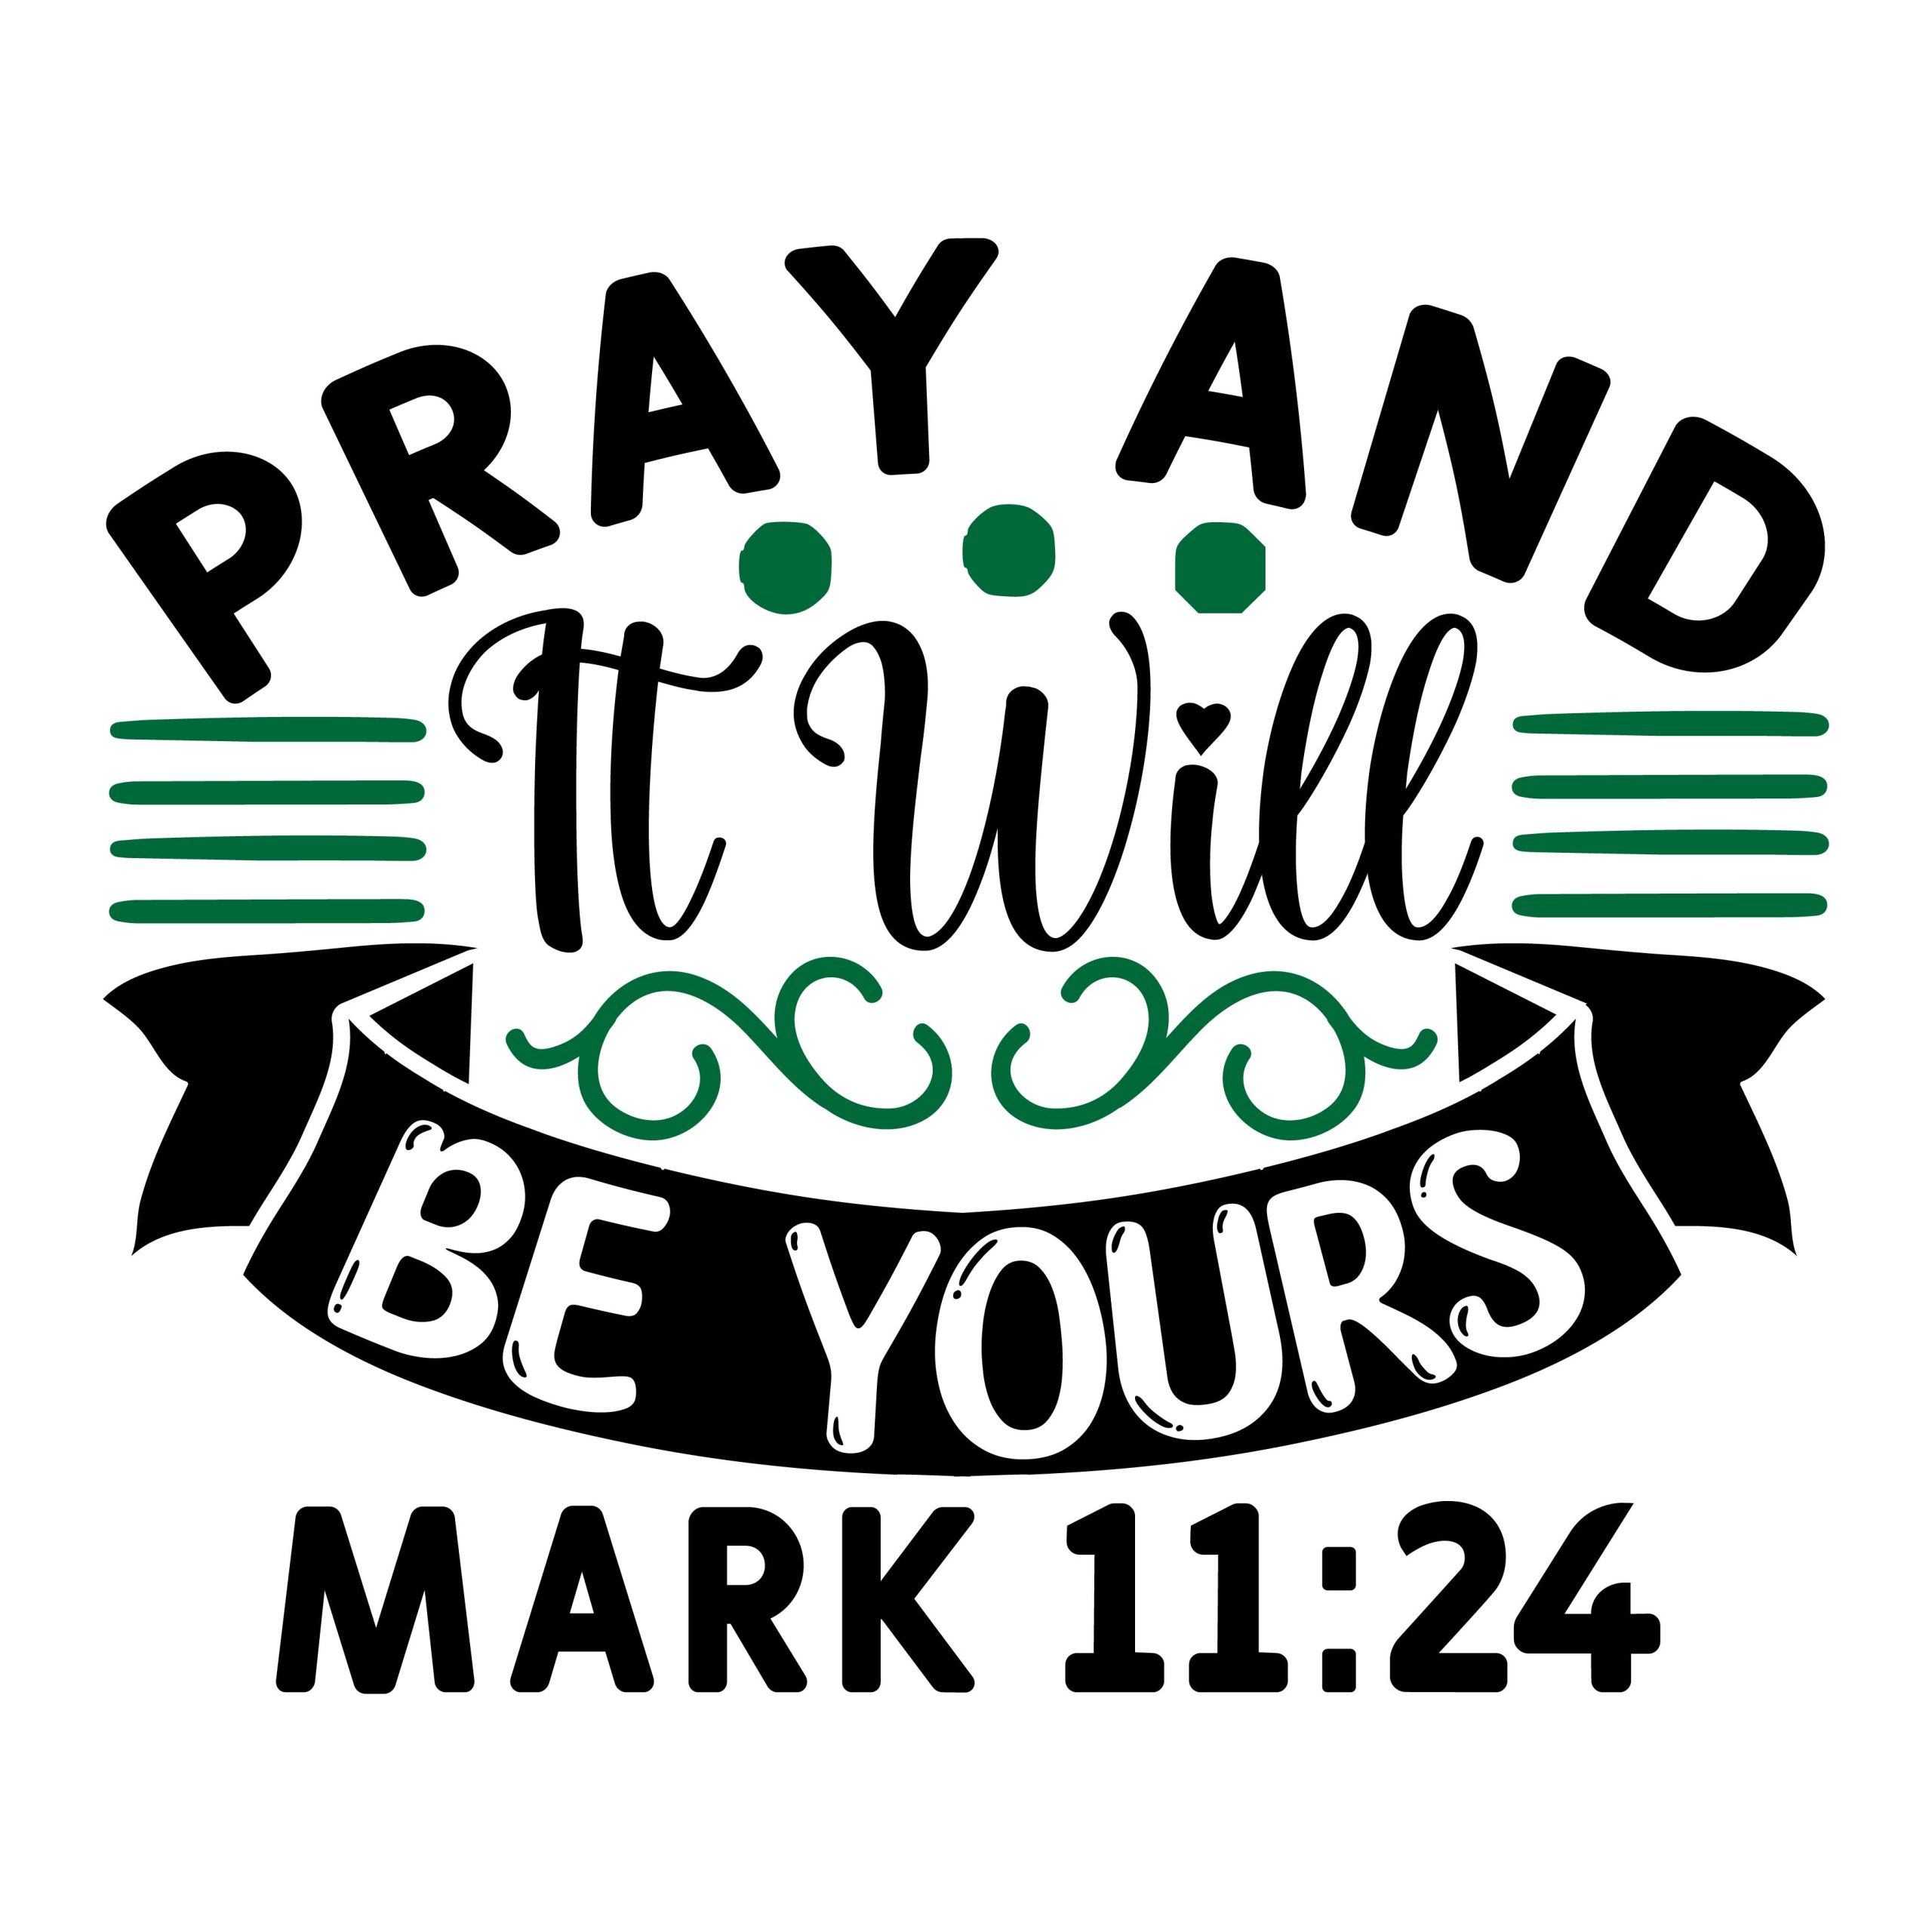 Pray and it will be yours Mark 11:24, bible verses, scripture verses, svg files, passages, sayings, cricut designs, silhouette, embroidery, bundle, free cut files, design space, vector